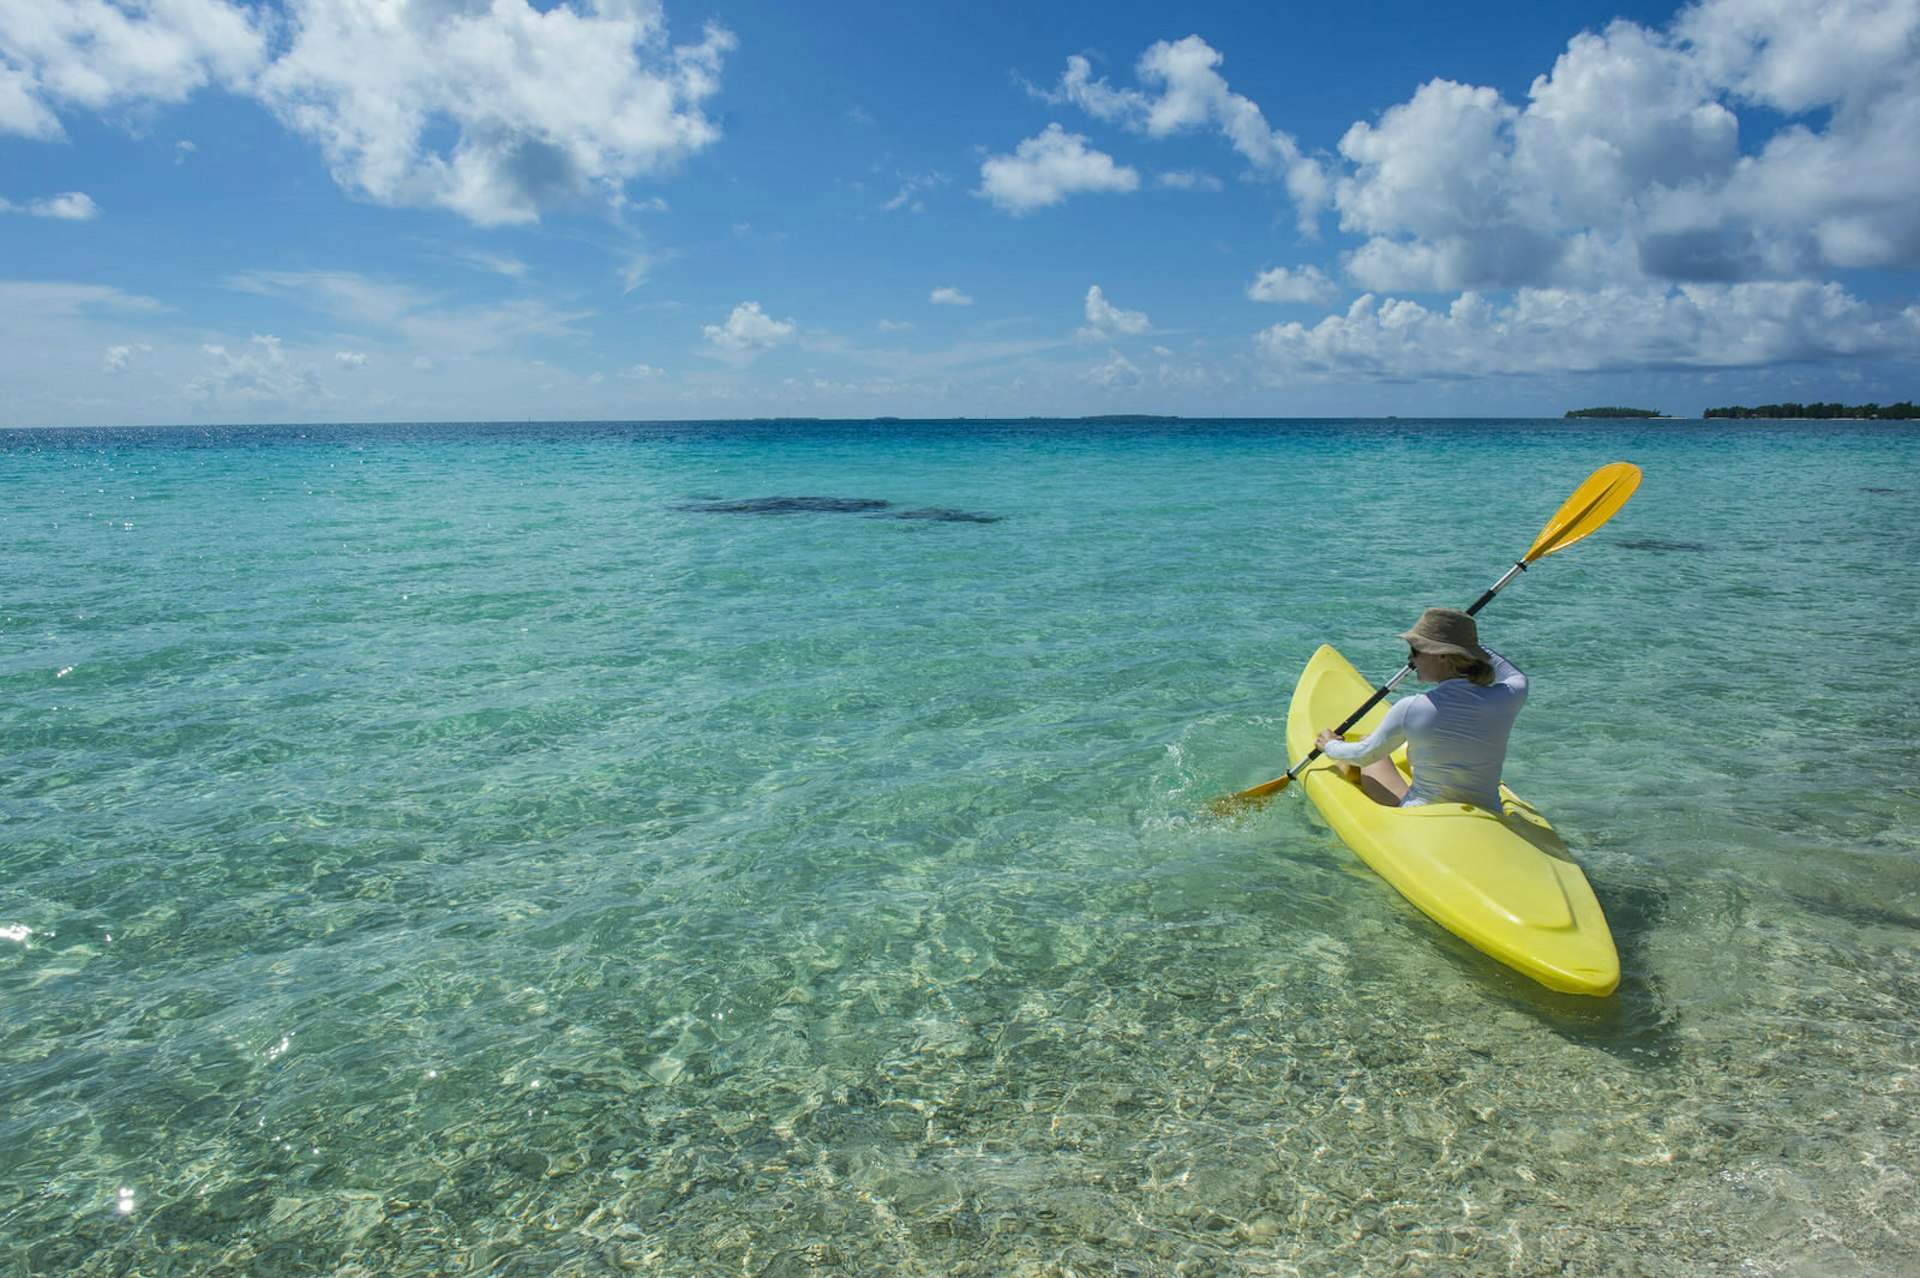 wedding anniversary trip ideas - a person kayaking in the clear waters of French Polynesia.